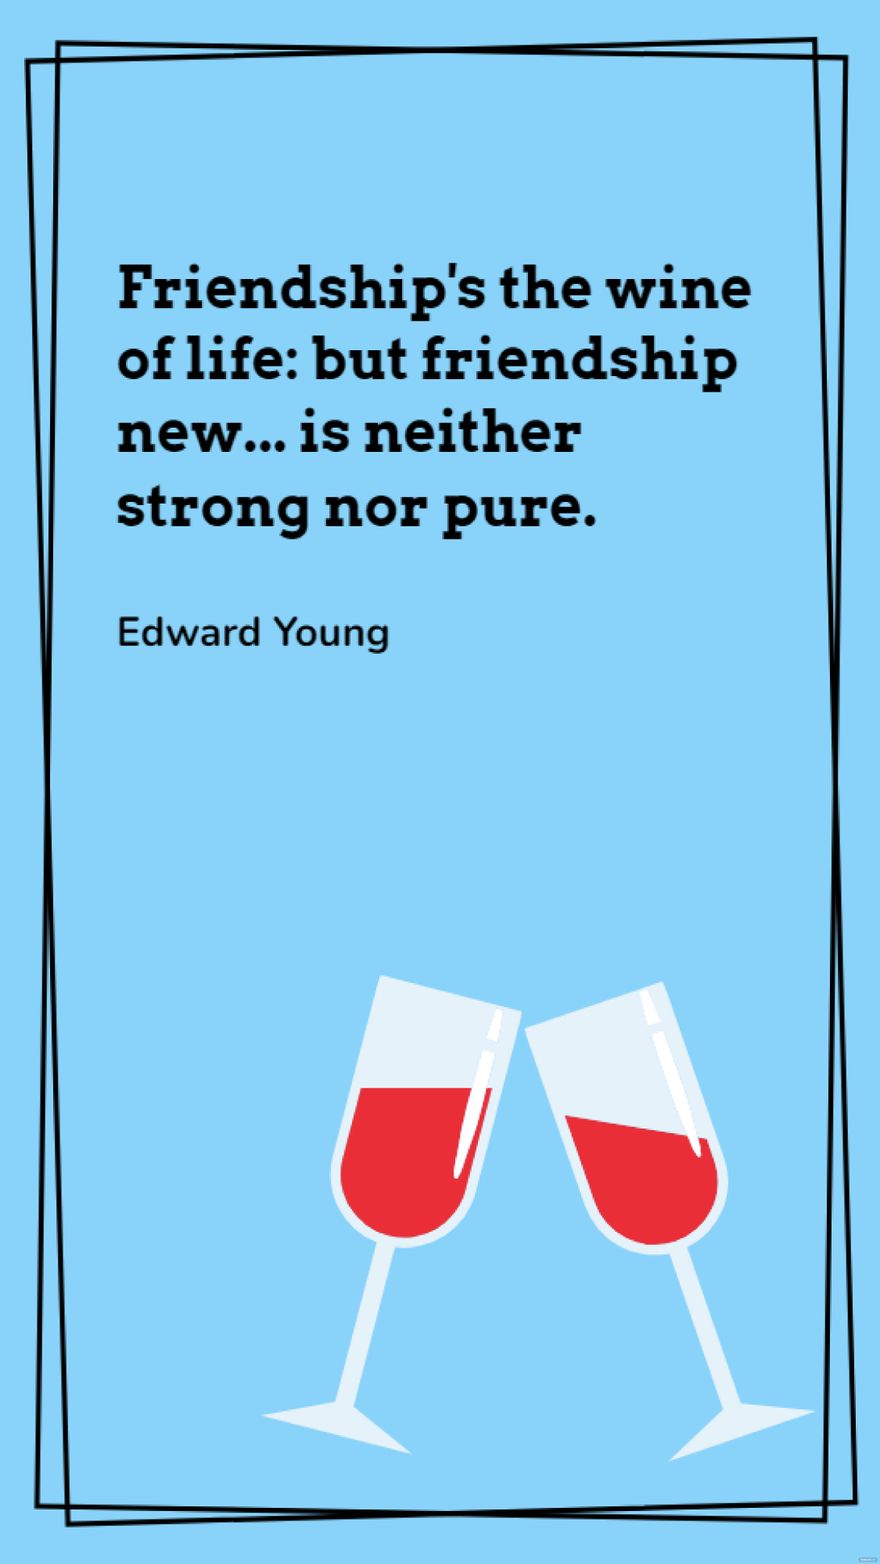 Free Edward Young - Friendship's the wine of life: but friendship new... is neither strong nor pure. in JPG